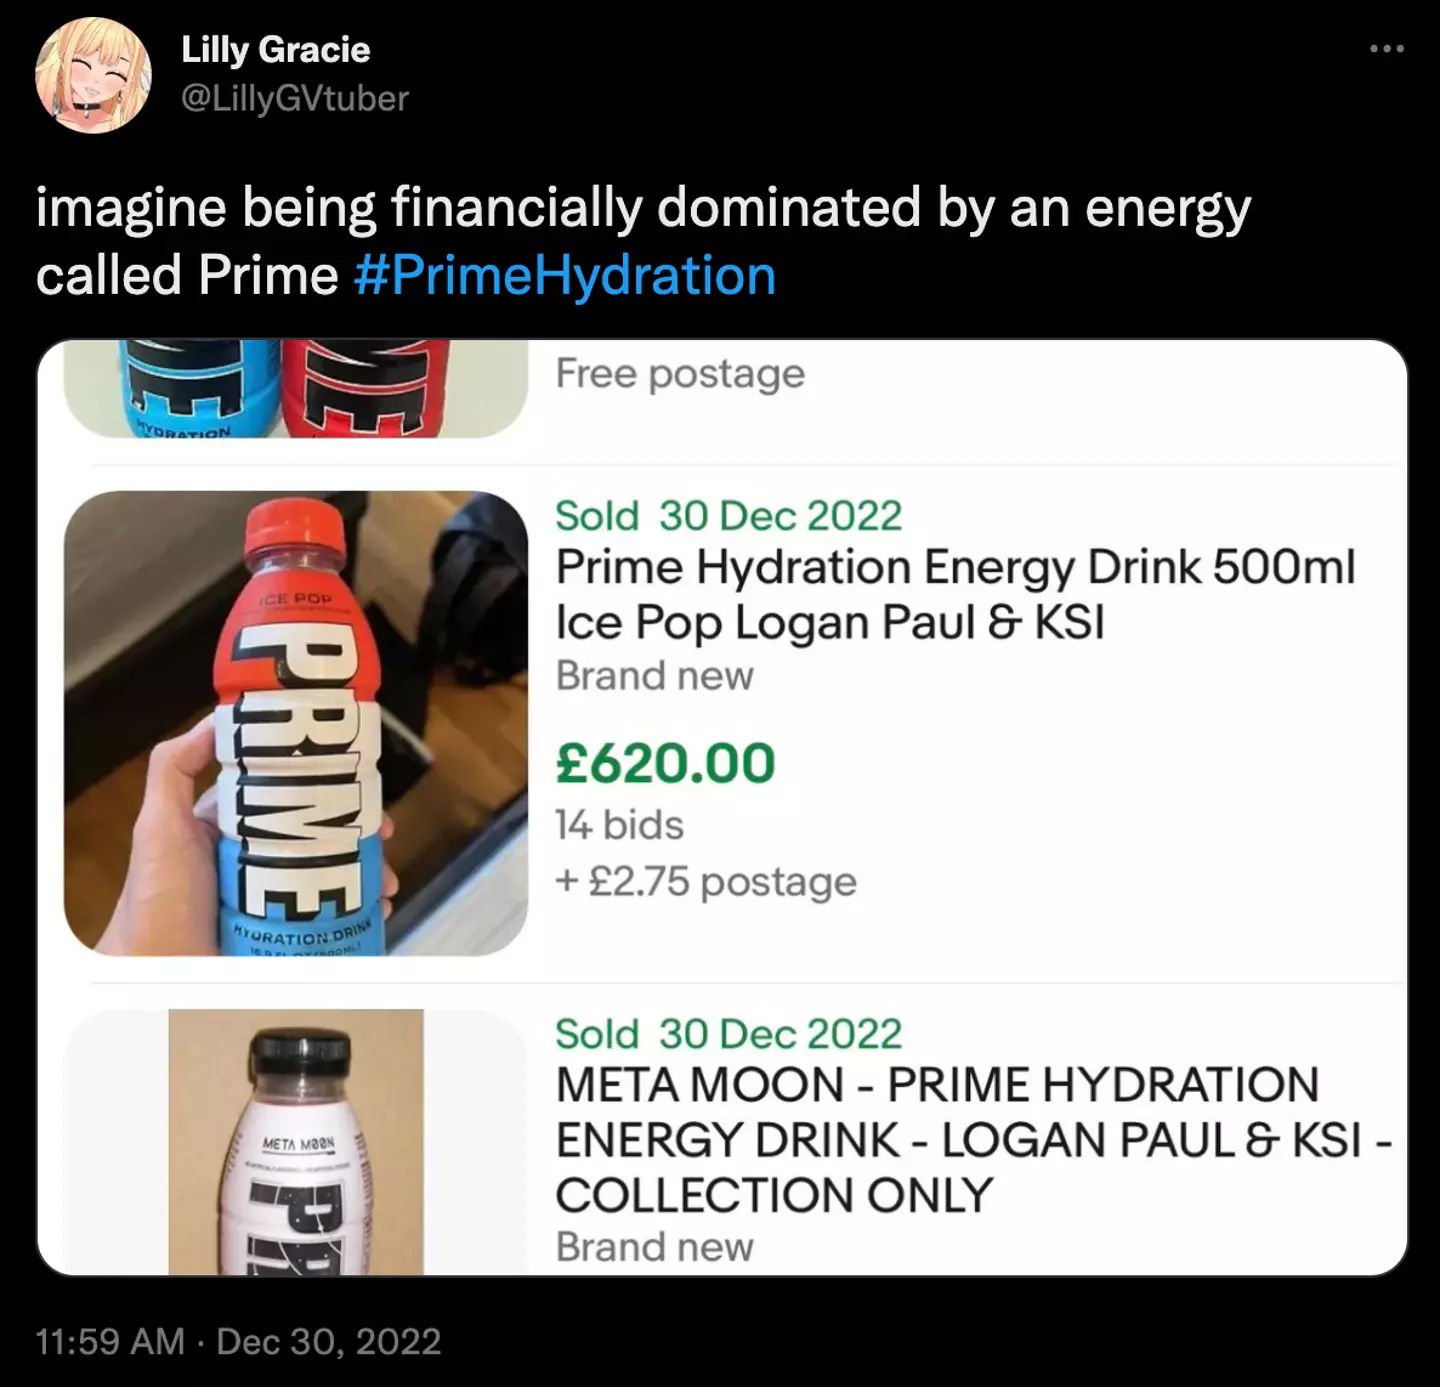 People have being going wild and paying extortionate amounts on Prime hydration drinks.